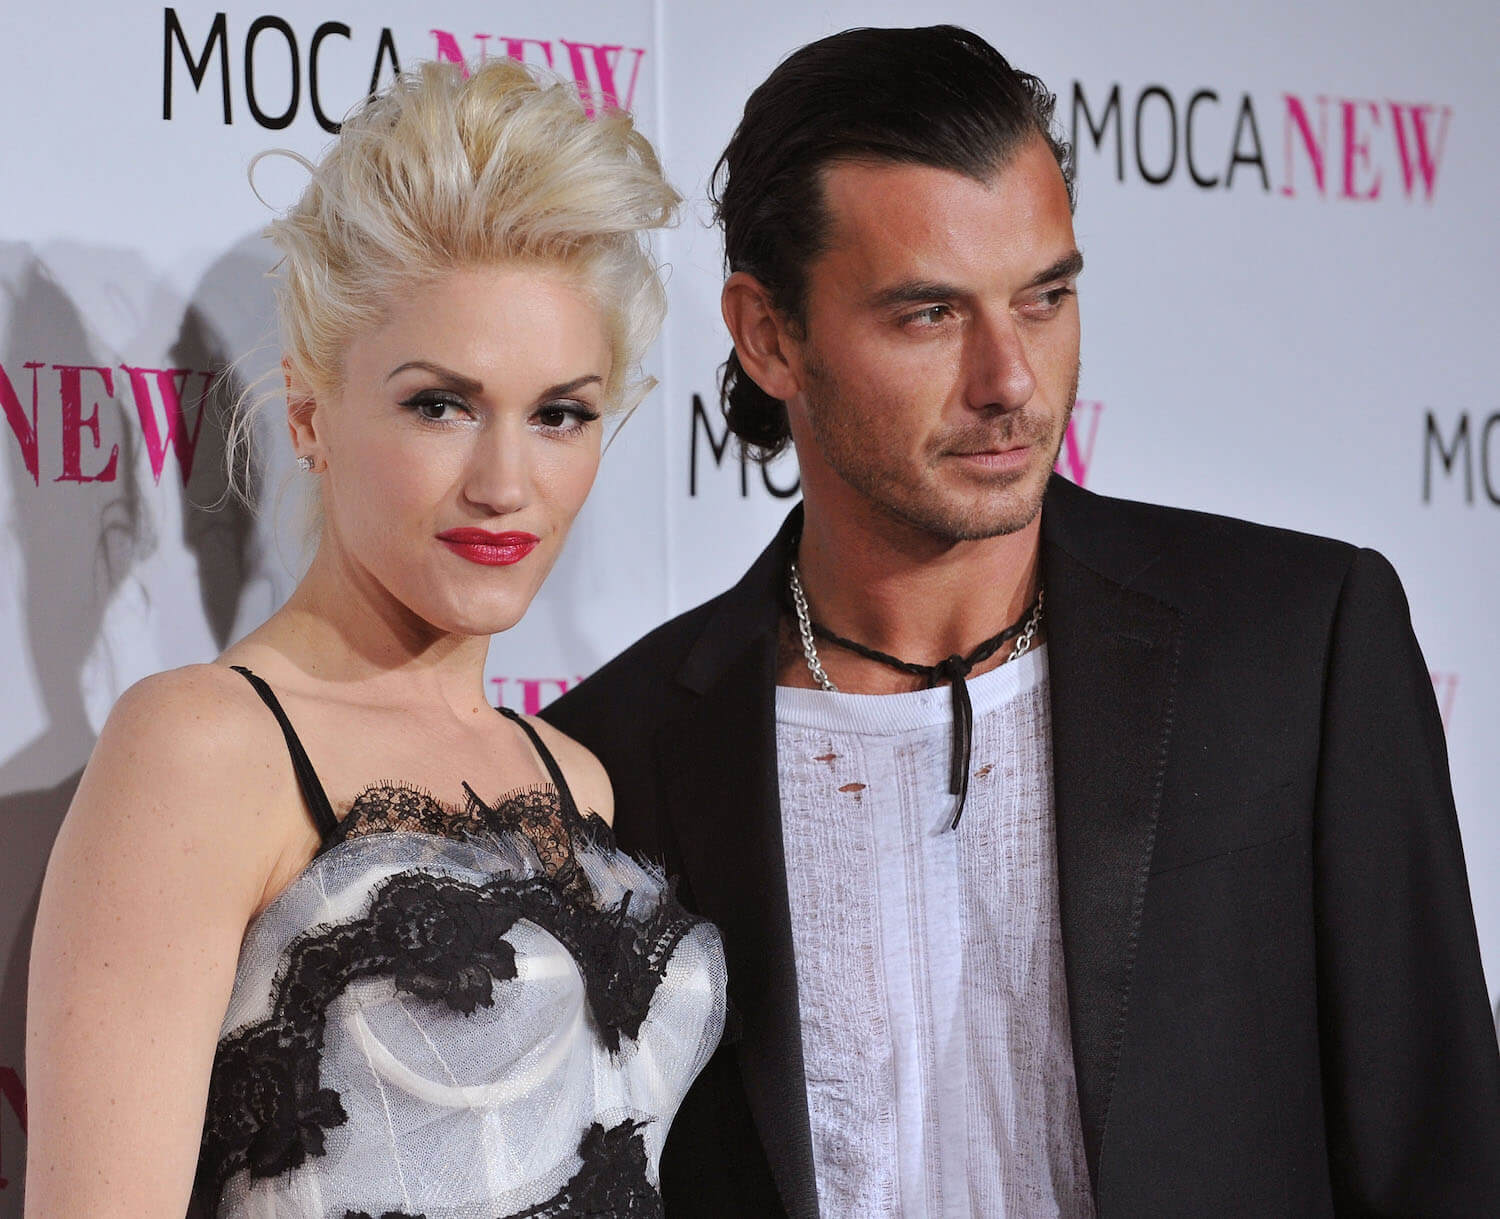 Gwen Stefani and Gavin Rossdale standing next to each other at an event in 2009